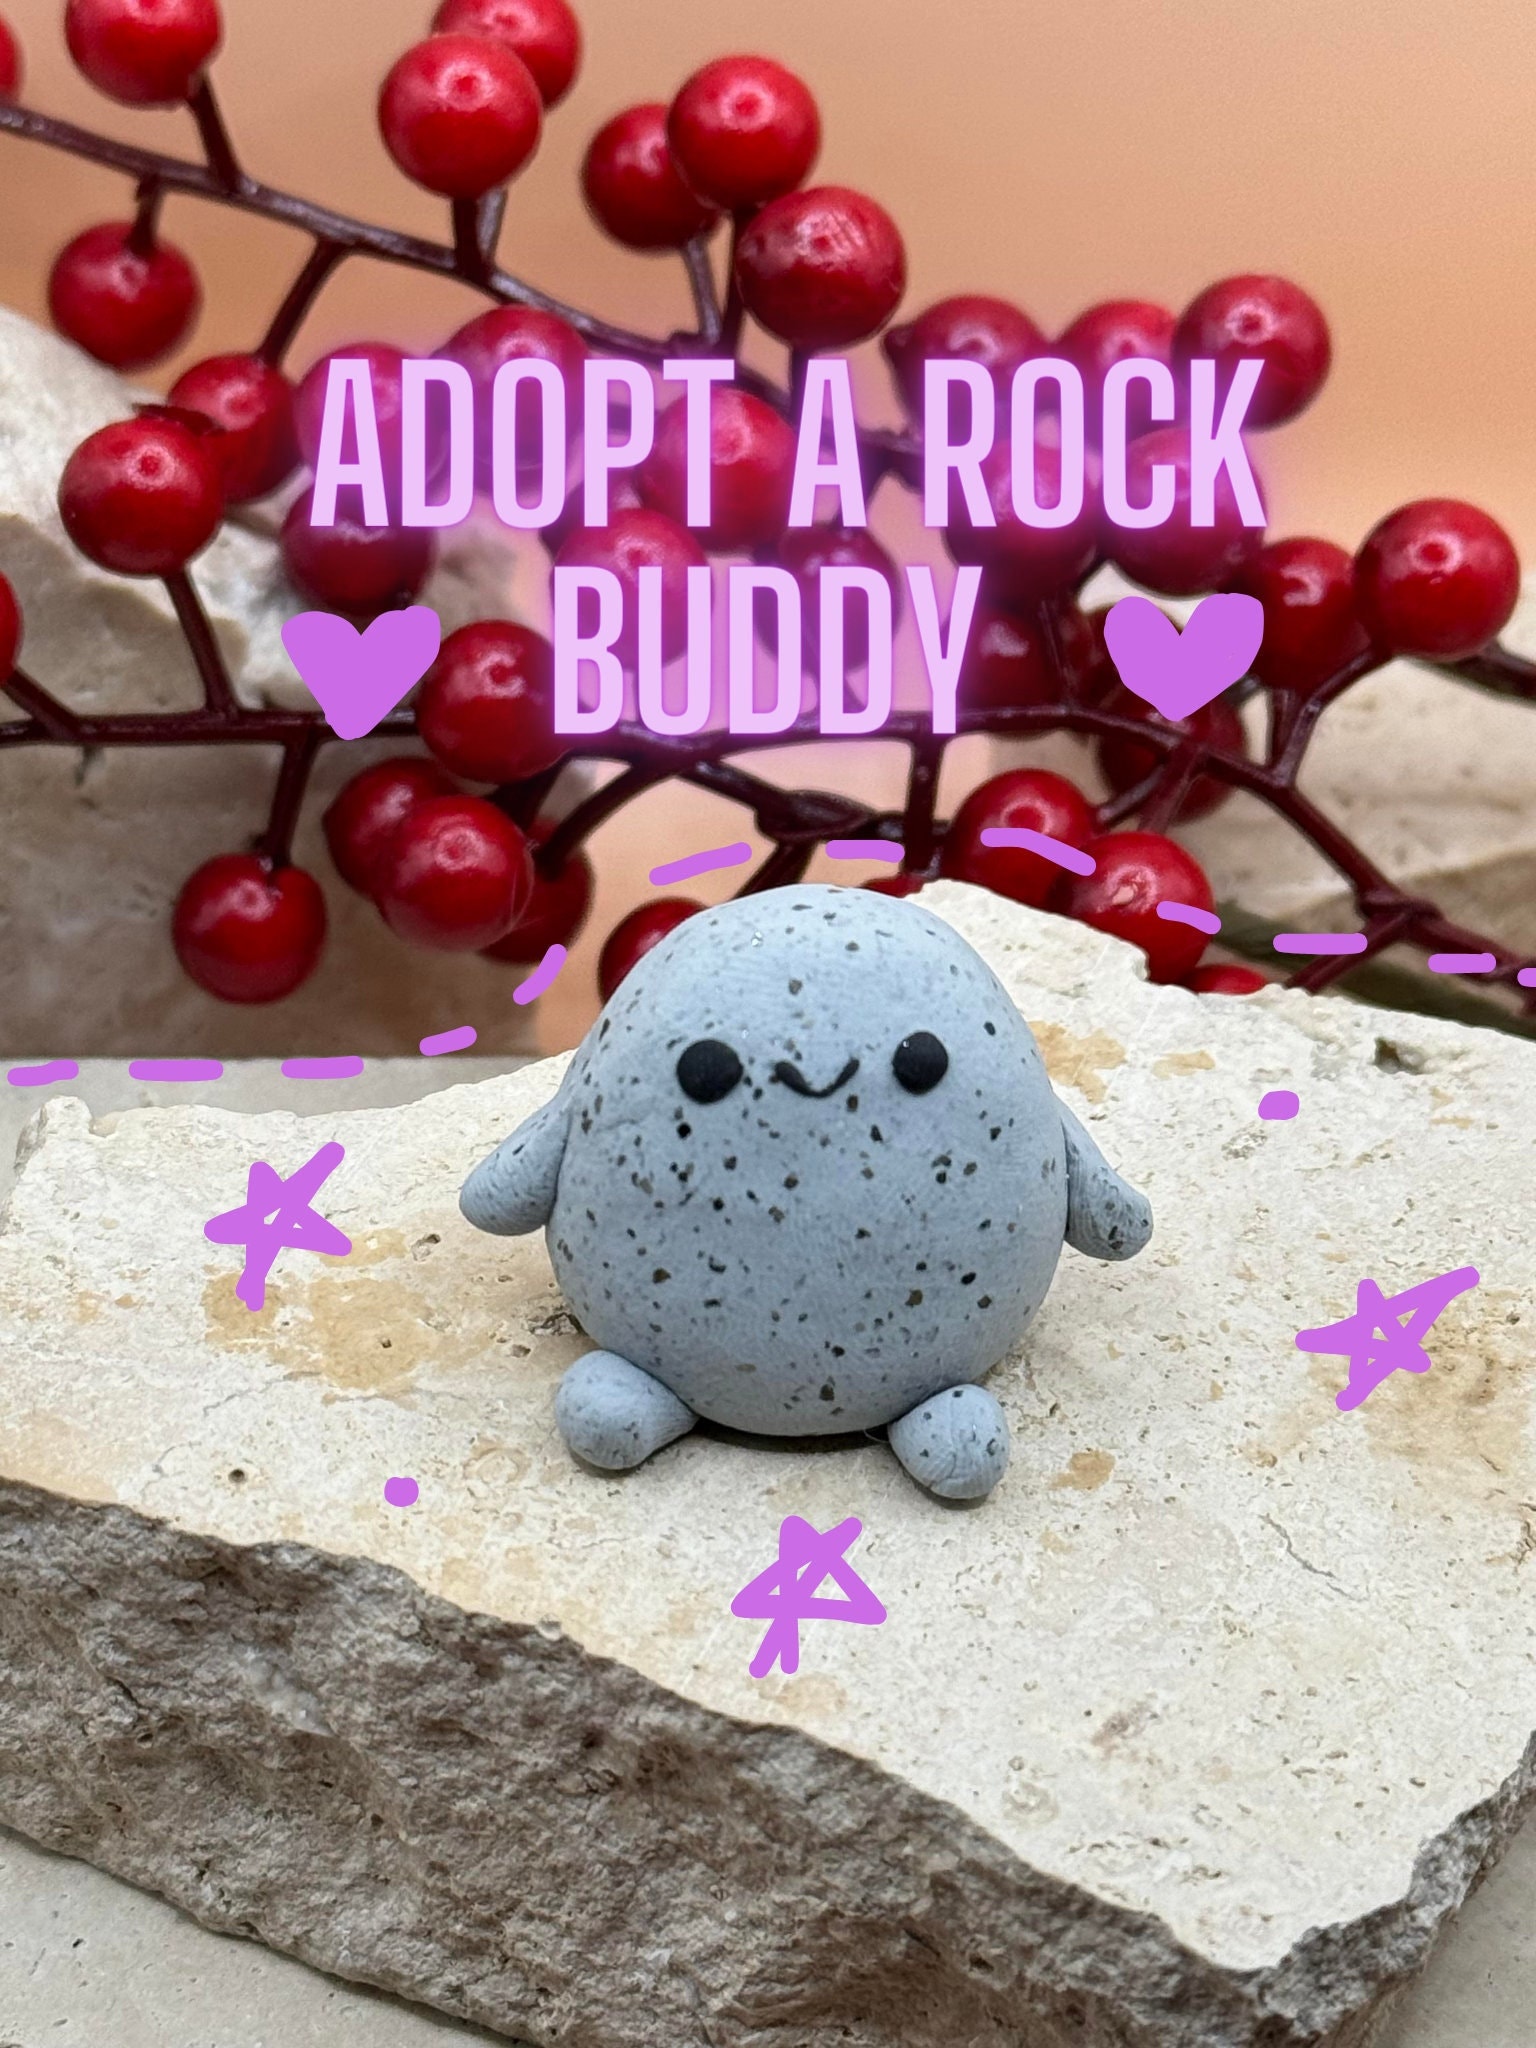 BABY ROCK Magnetic W/ Adoption Certificate Adopt an Adorable Desk Pet,  Emotional Support Buddy, Pretend Pet, Carry Around Companion 